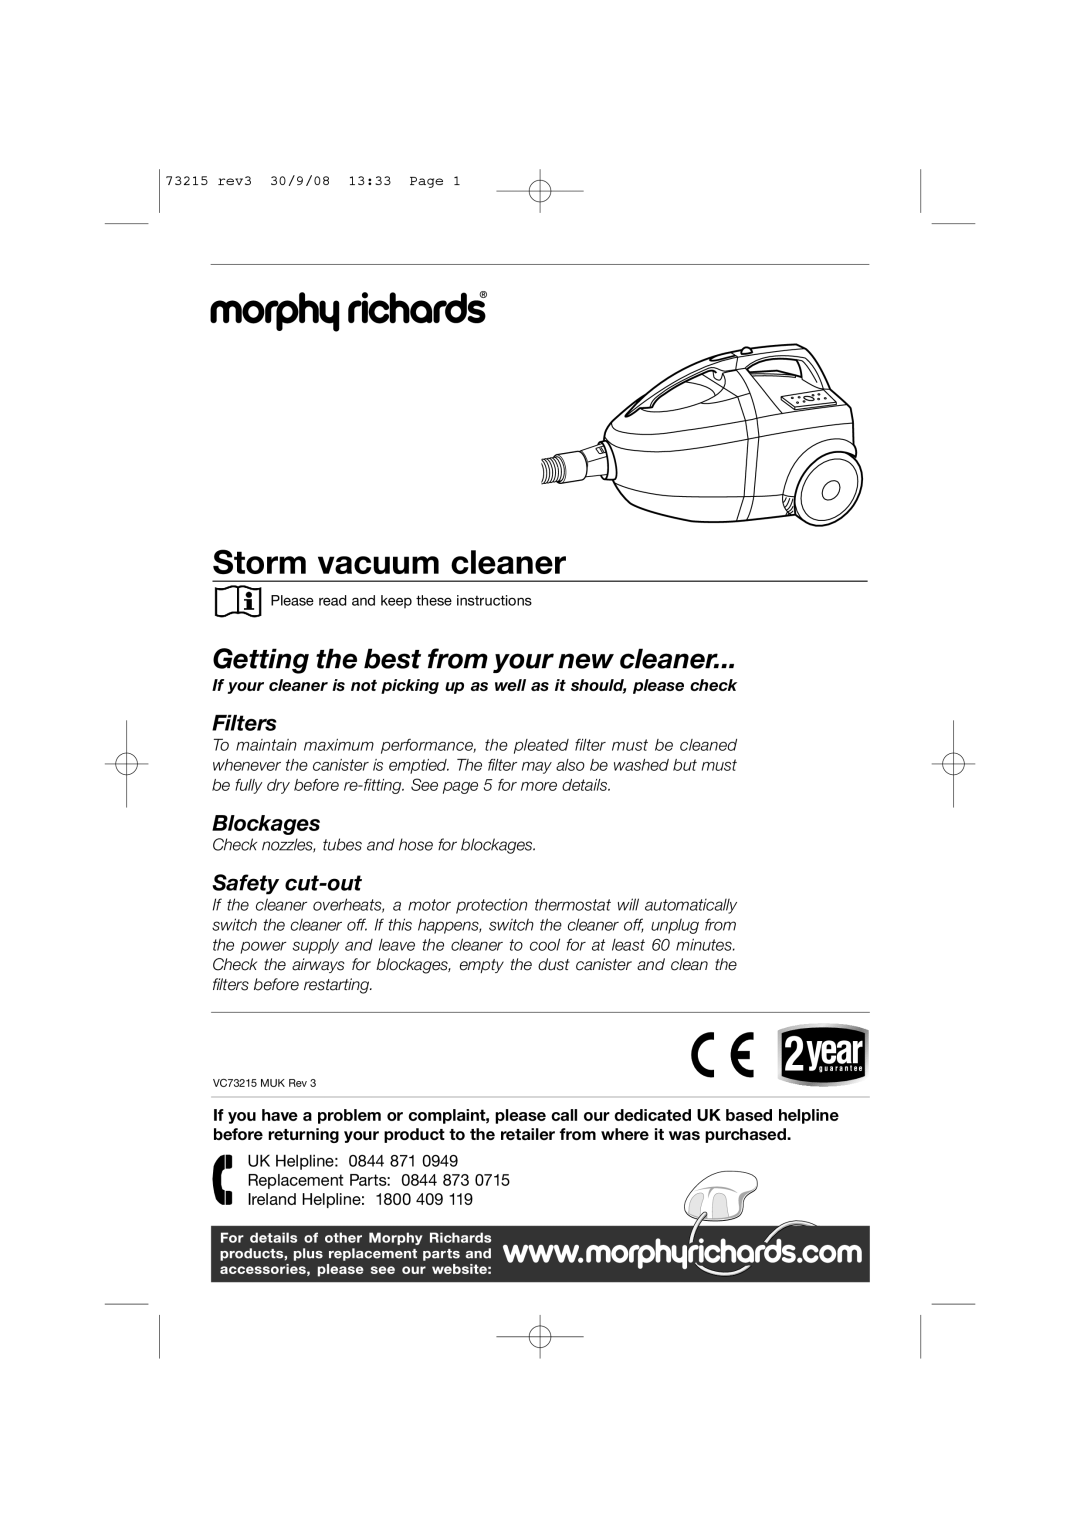 Morphy Richards VC73215 manual Storm vacuum cleaner, Getting the best from your new cleaner, Filters, Blockages 